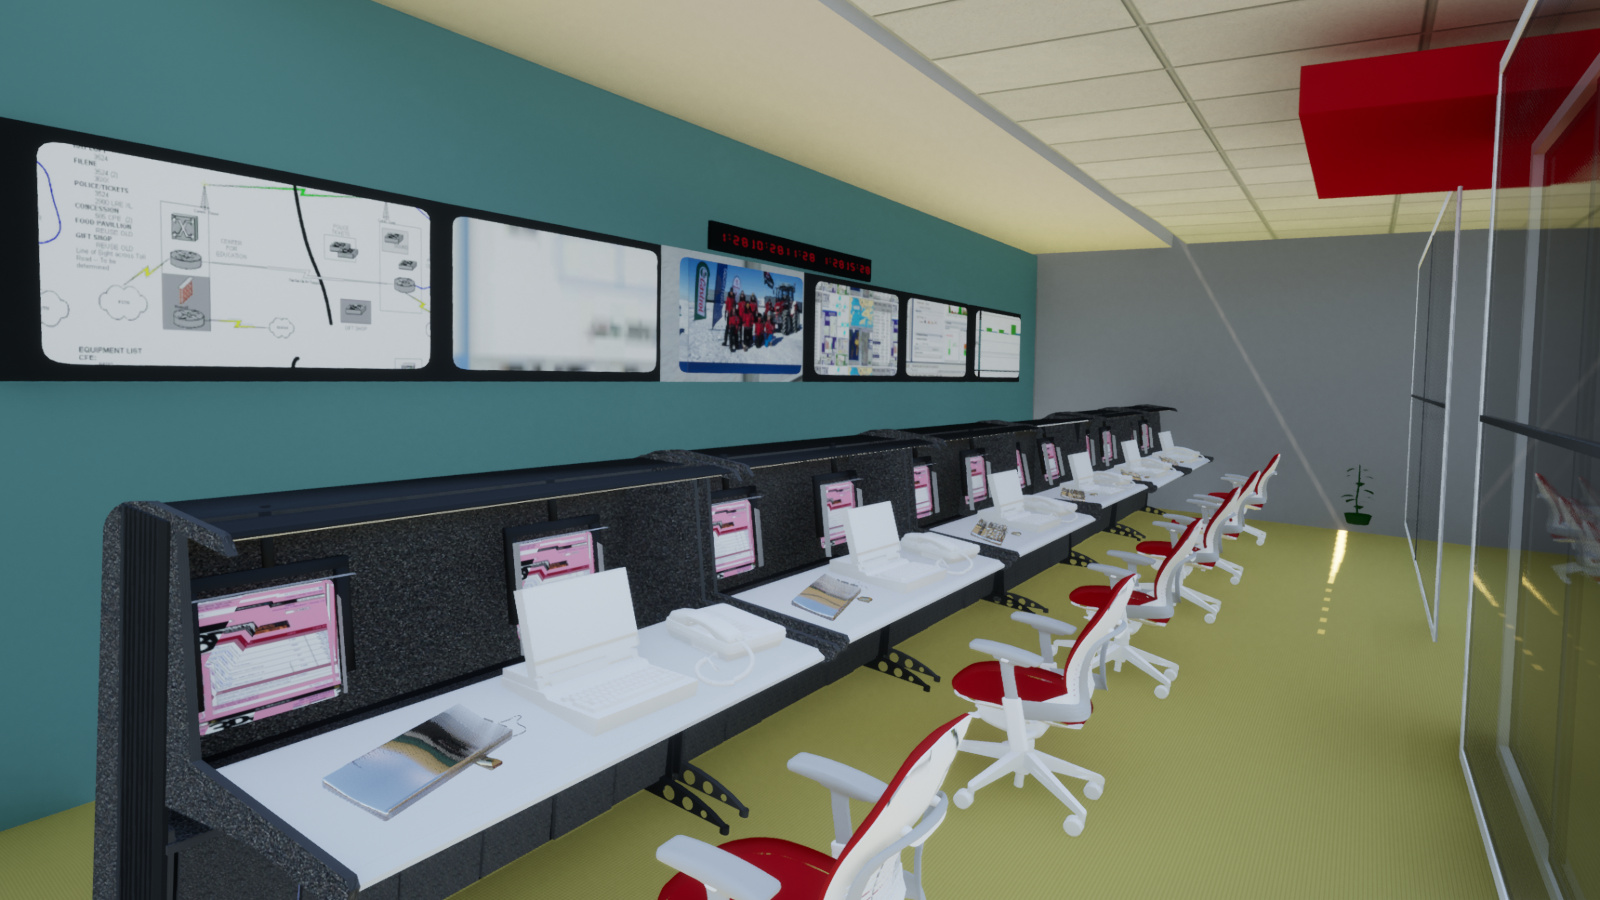 oblique view, from the left, of operator workstations with individual computer systems, in a row which also faces a number of larger wall-mounted screens for shared information